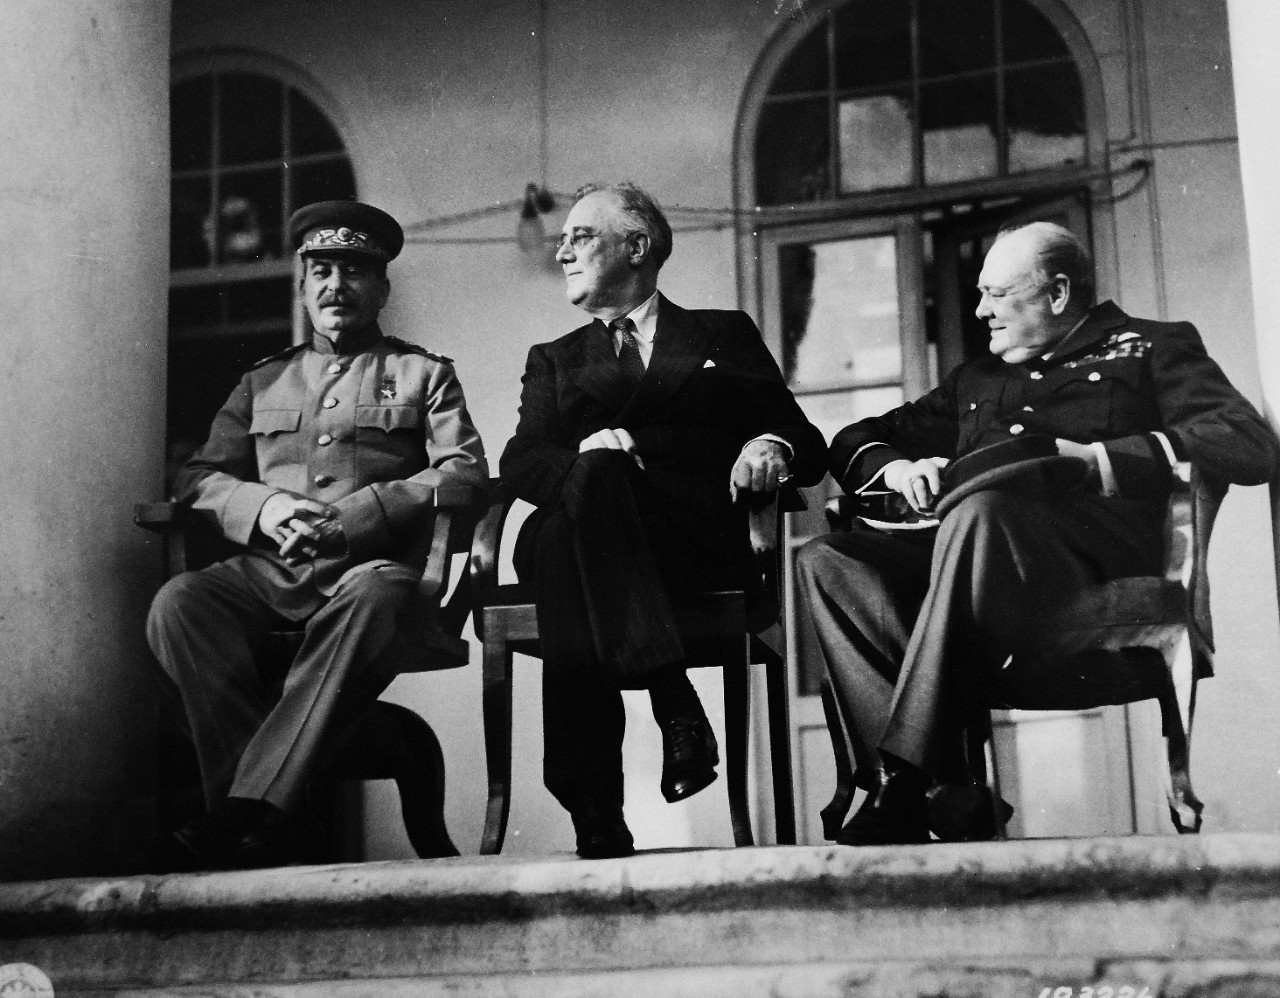 Lot 11597-1:  Tehran Conference, November-December 1943.   The strategy meeting of Premier Joseph Stalin, President Franklin D. Roosevelt, and Prime Minister Winston Churchill at the Russian Embassy at Tehran, Iran.  This conference was the first of “Big Three” leaders (Soviet Union, United States and United Kingdom).   U.S. Army photograph, SC 183226, from the Office of War Information Collection. Courtesy of the Library of Congress.     (2016/01/15).